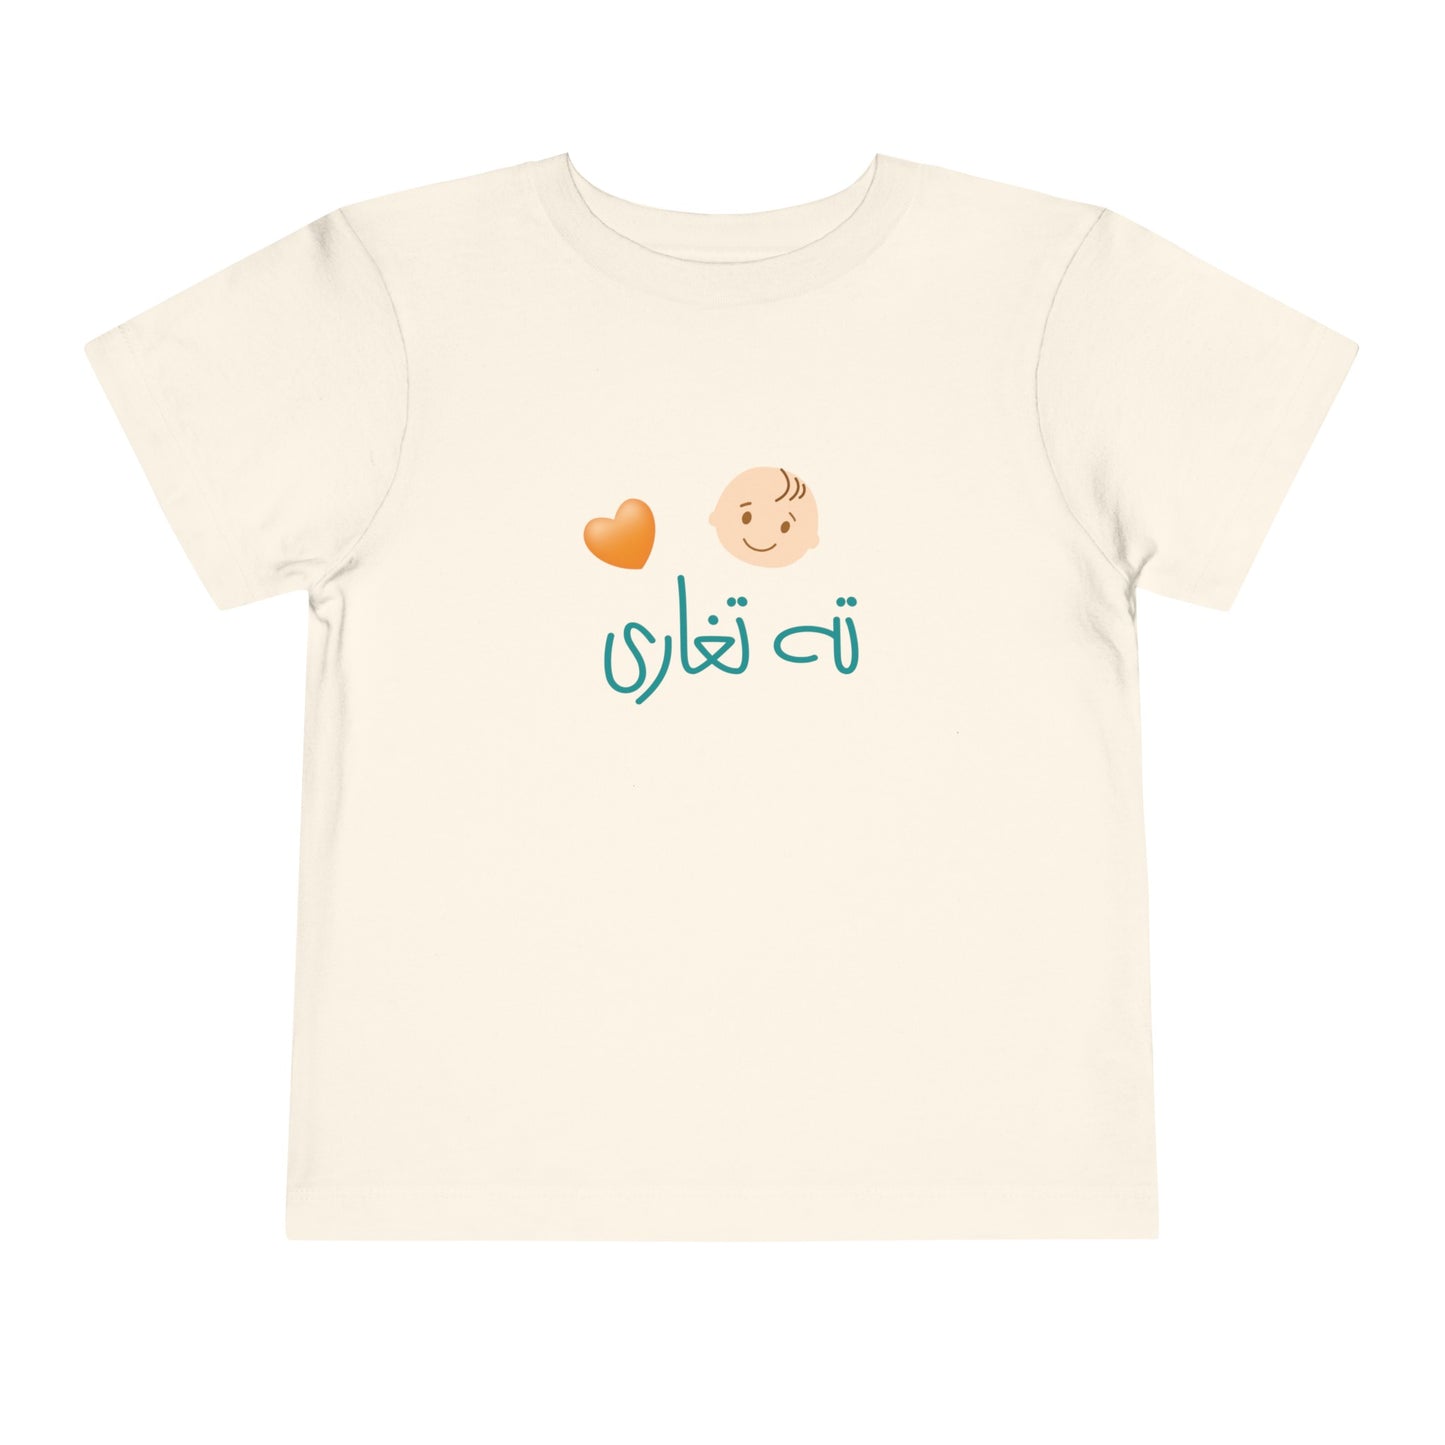 Toddler Short Sleeve Tee "The Youngest"/ته تغاری